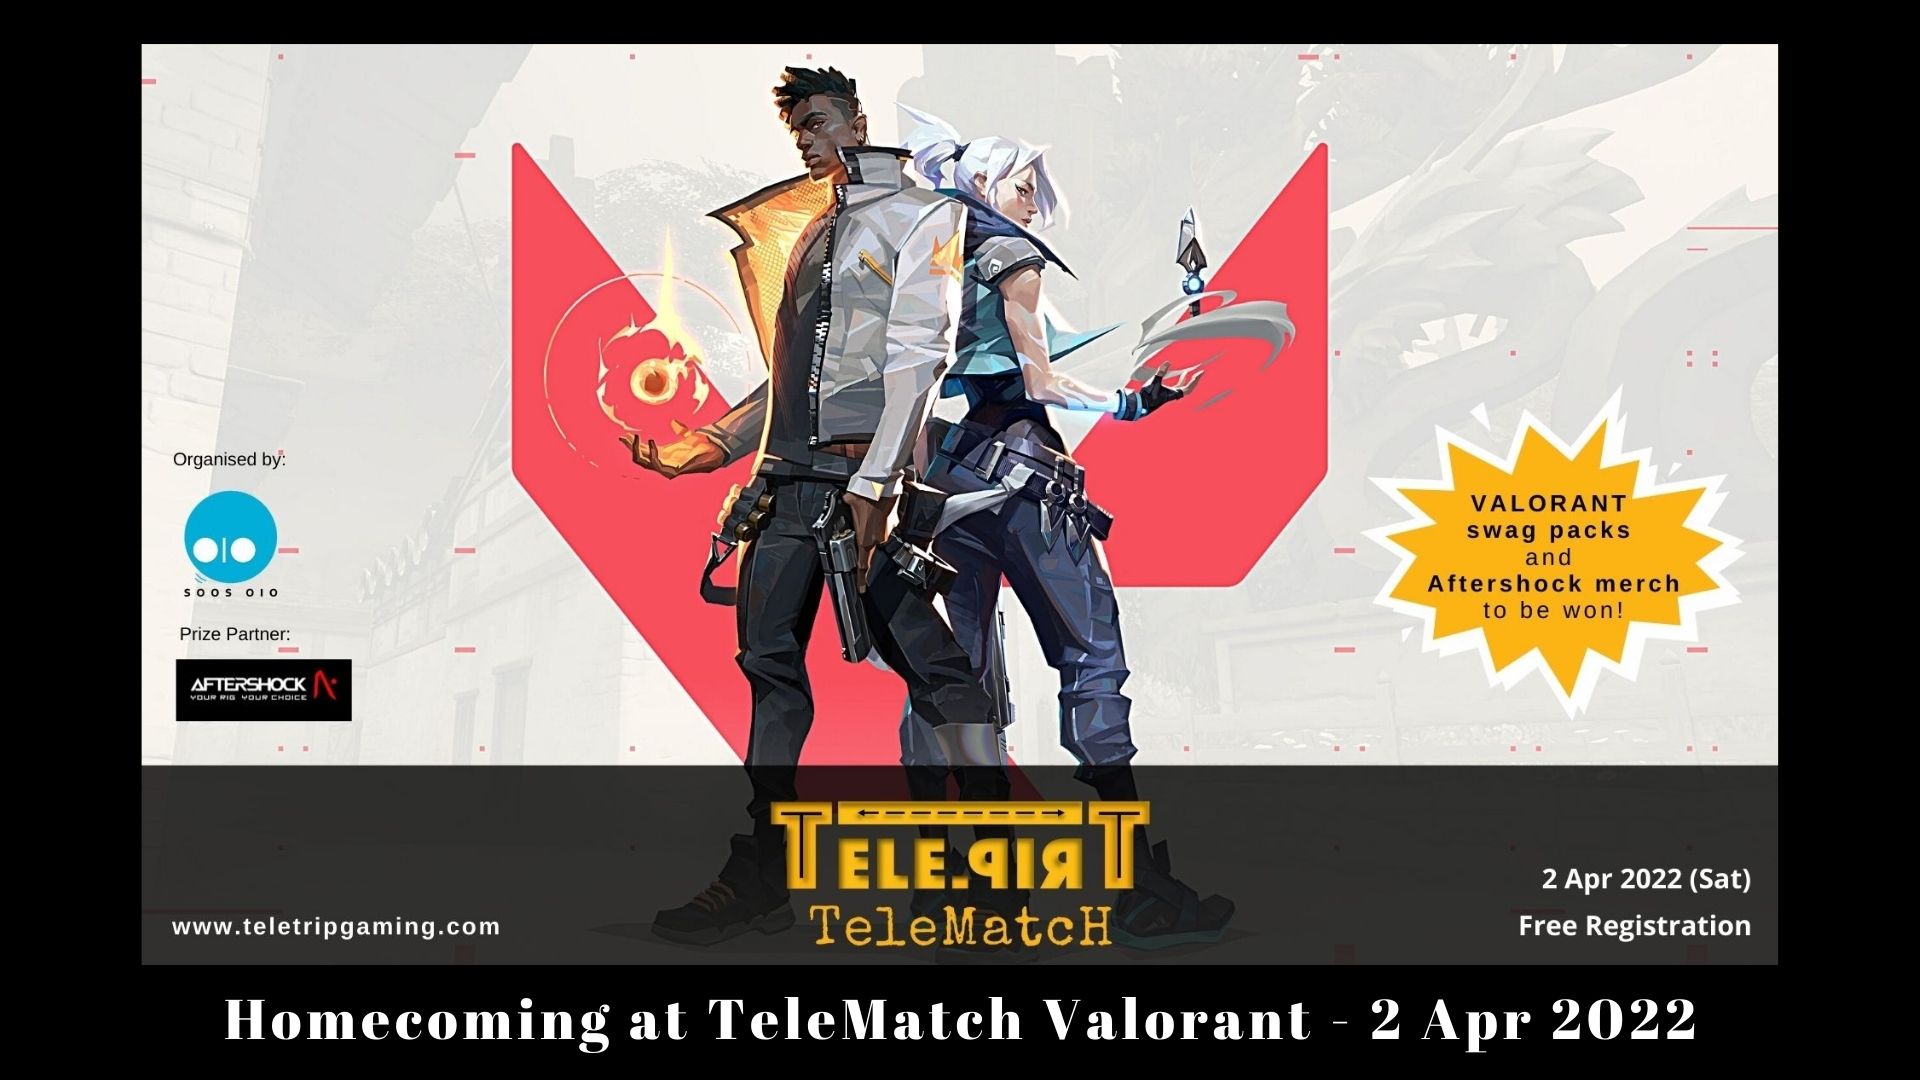 Homecoming at TeleMatch Valorant - 2 Apr 2022